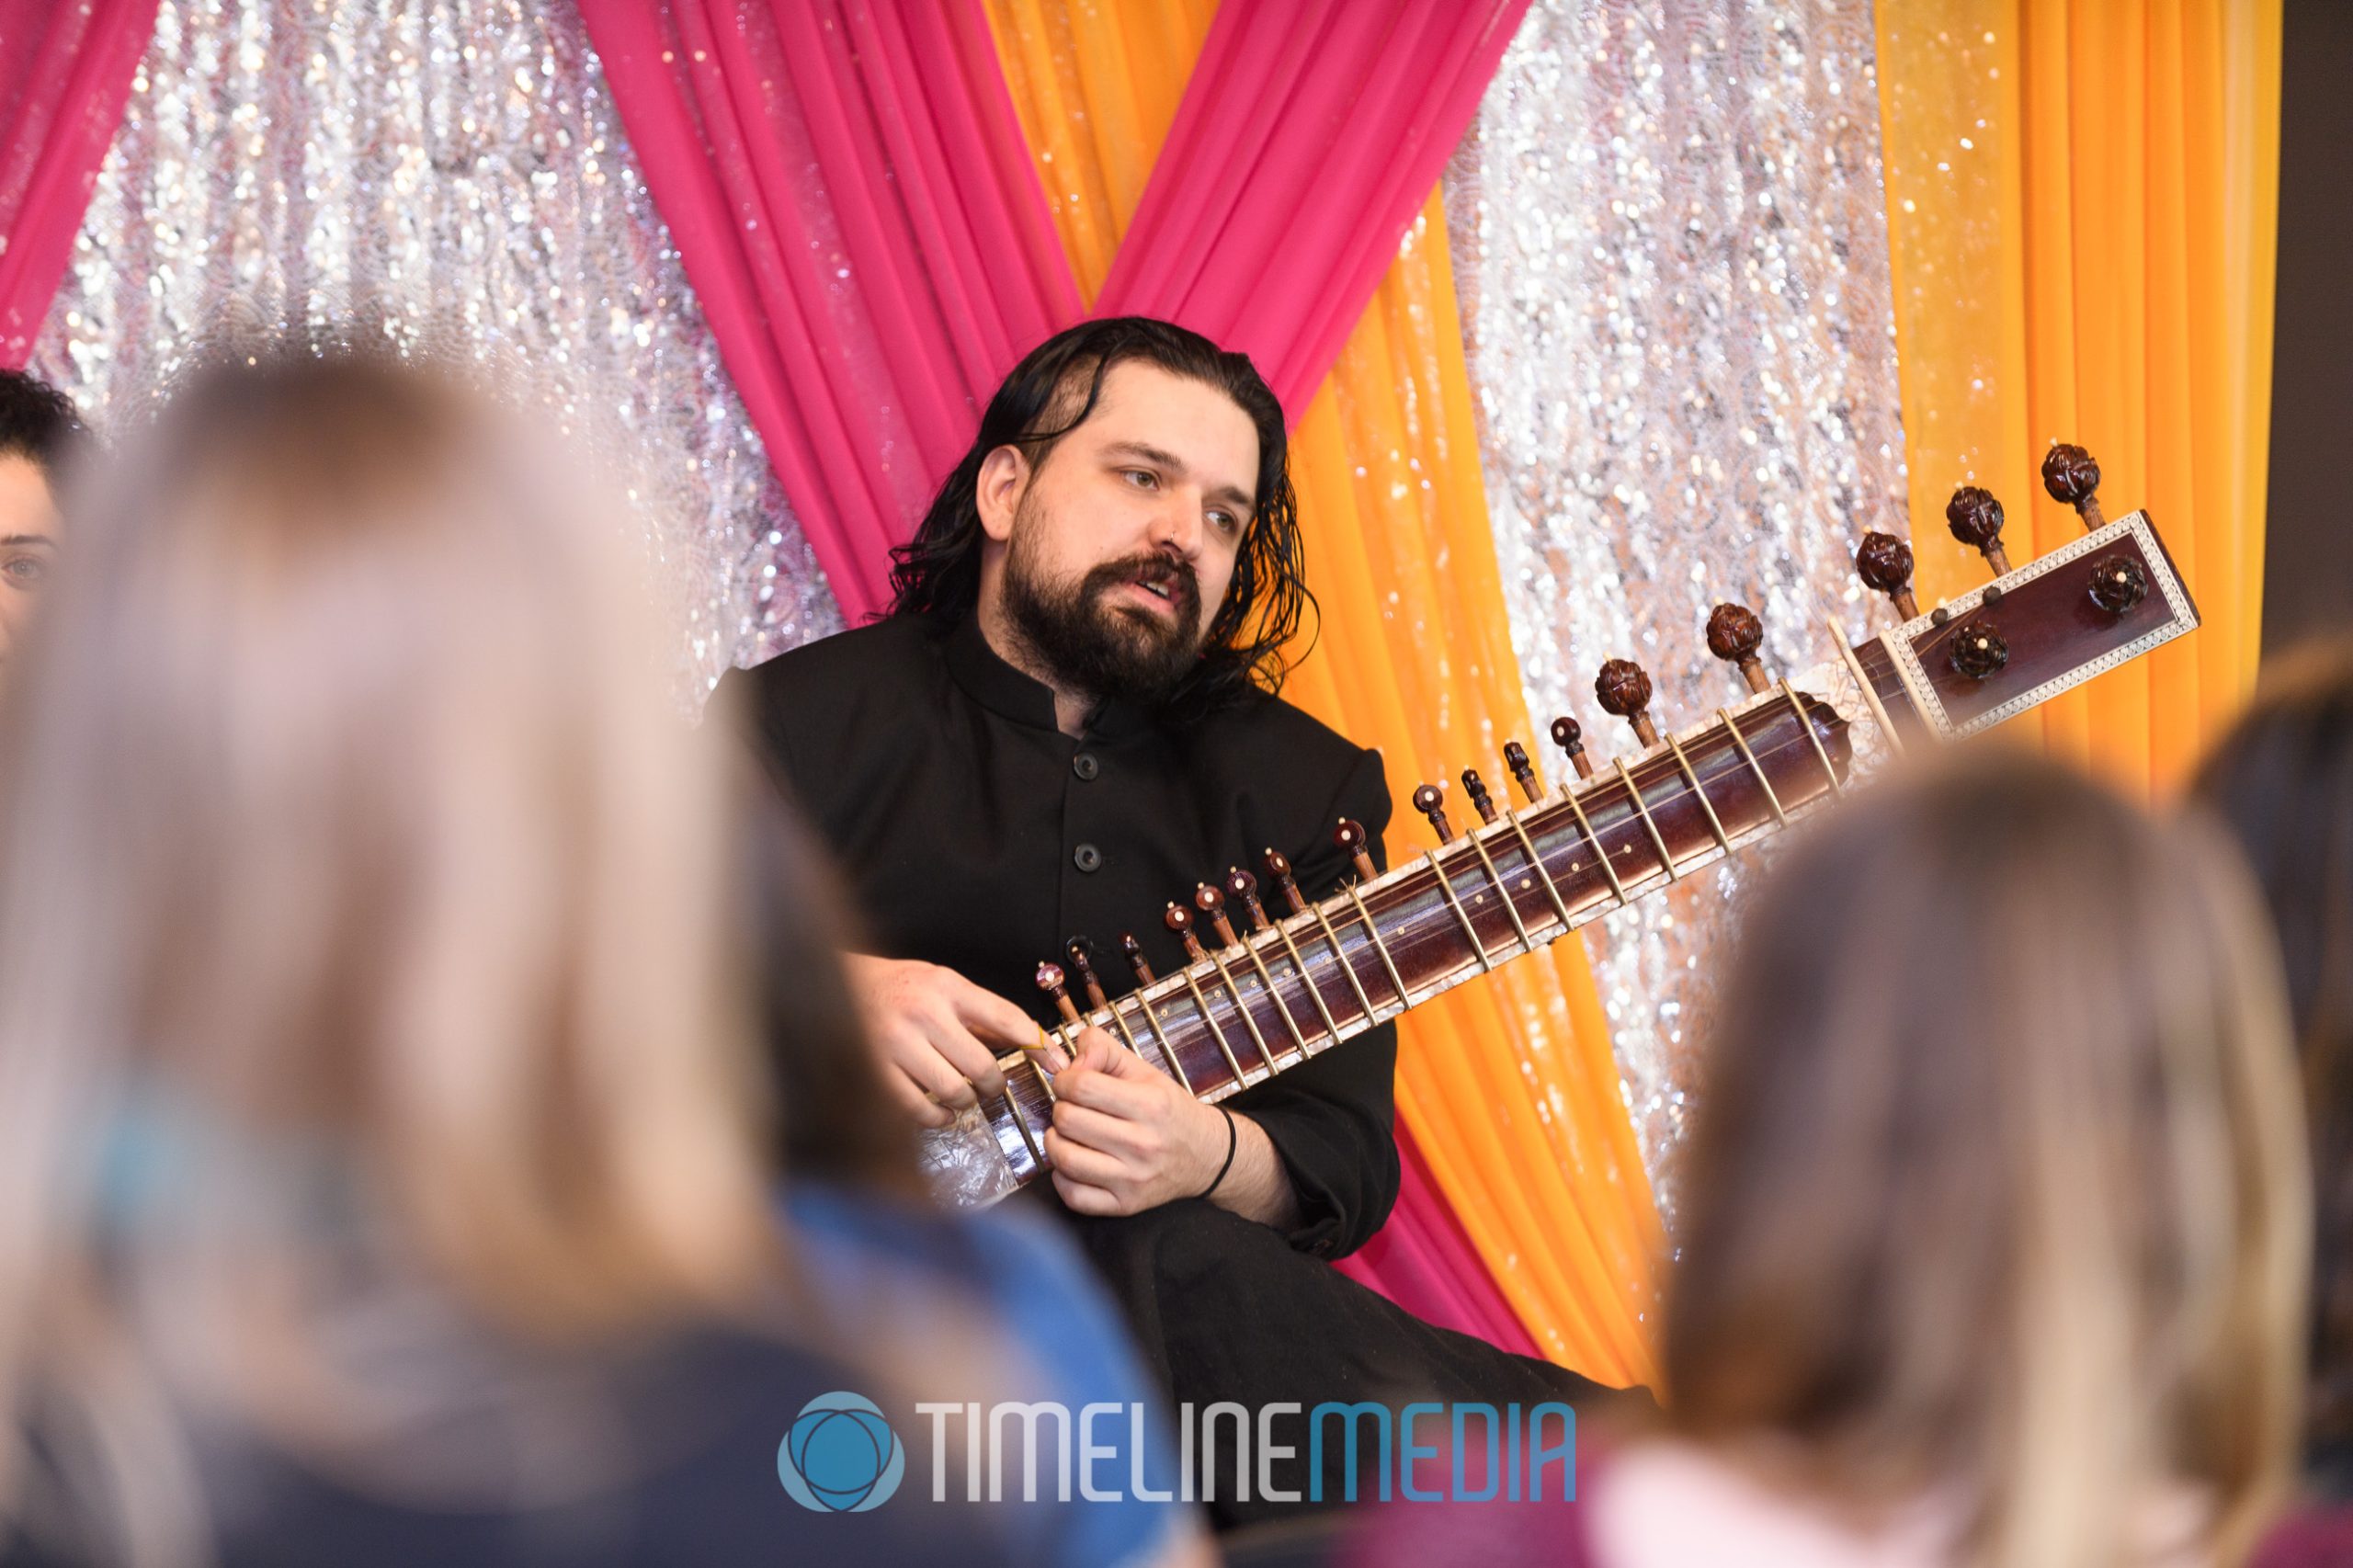 Sitar players at the Emmes Corporation for the India Day celebration ©TimeLine Media